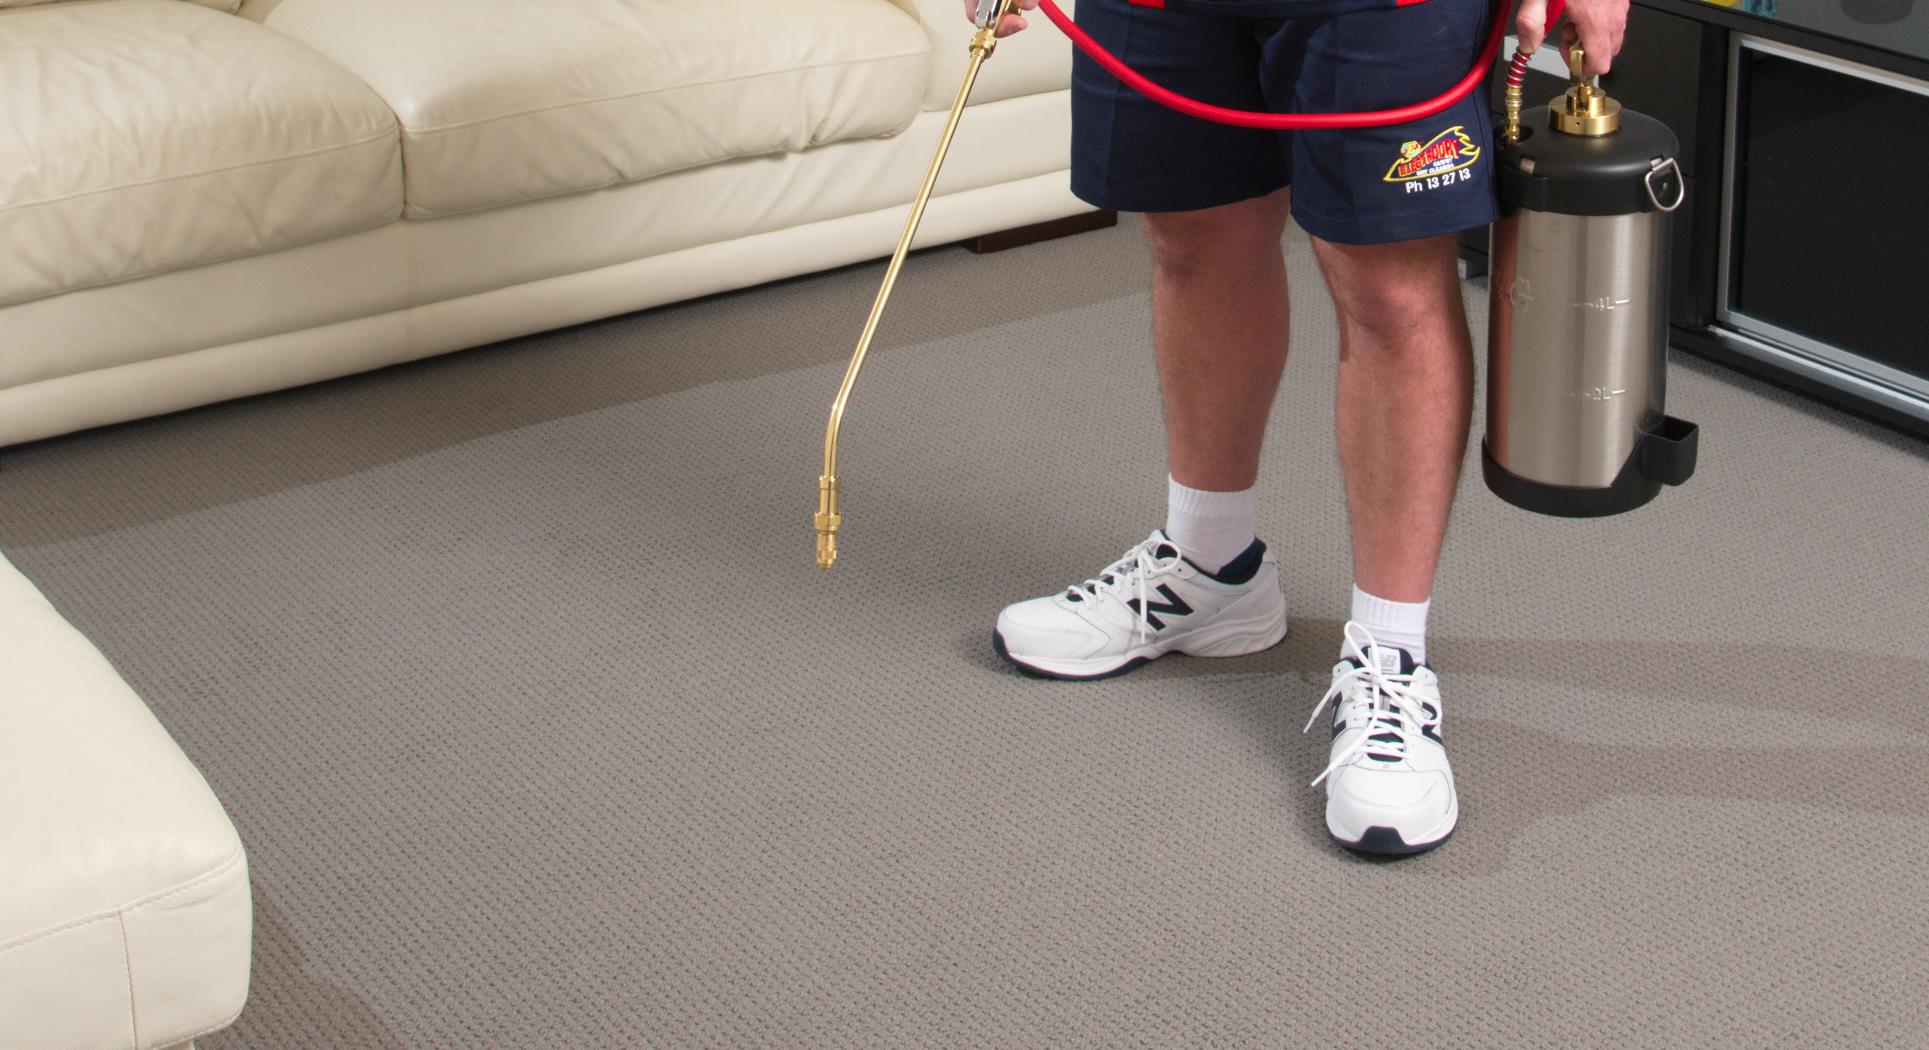 10 Carpet Cleaning Facts You Need to Know